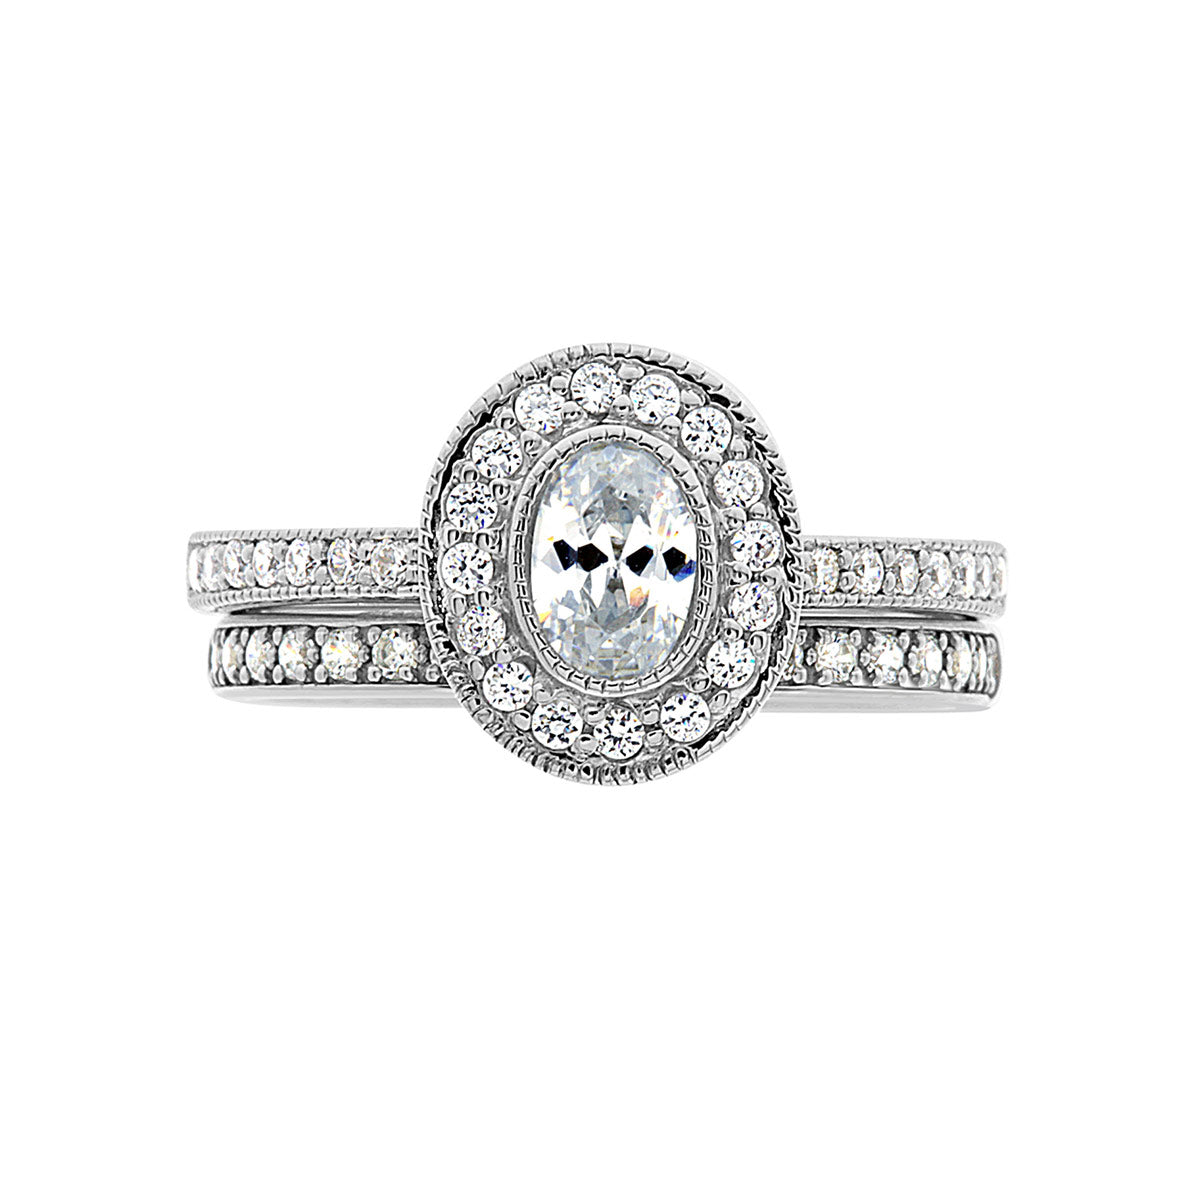 Milgrain Detail Engagement Ring in white gold with a matching diamond set wedding ring